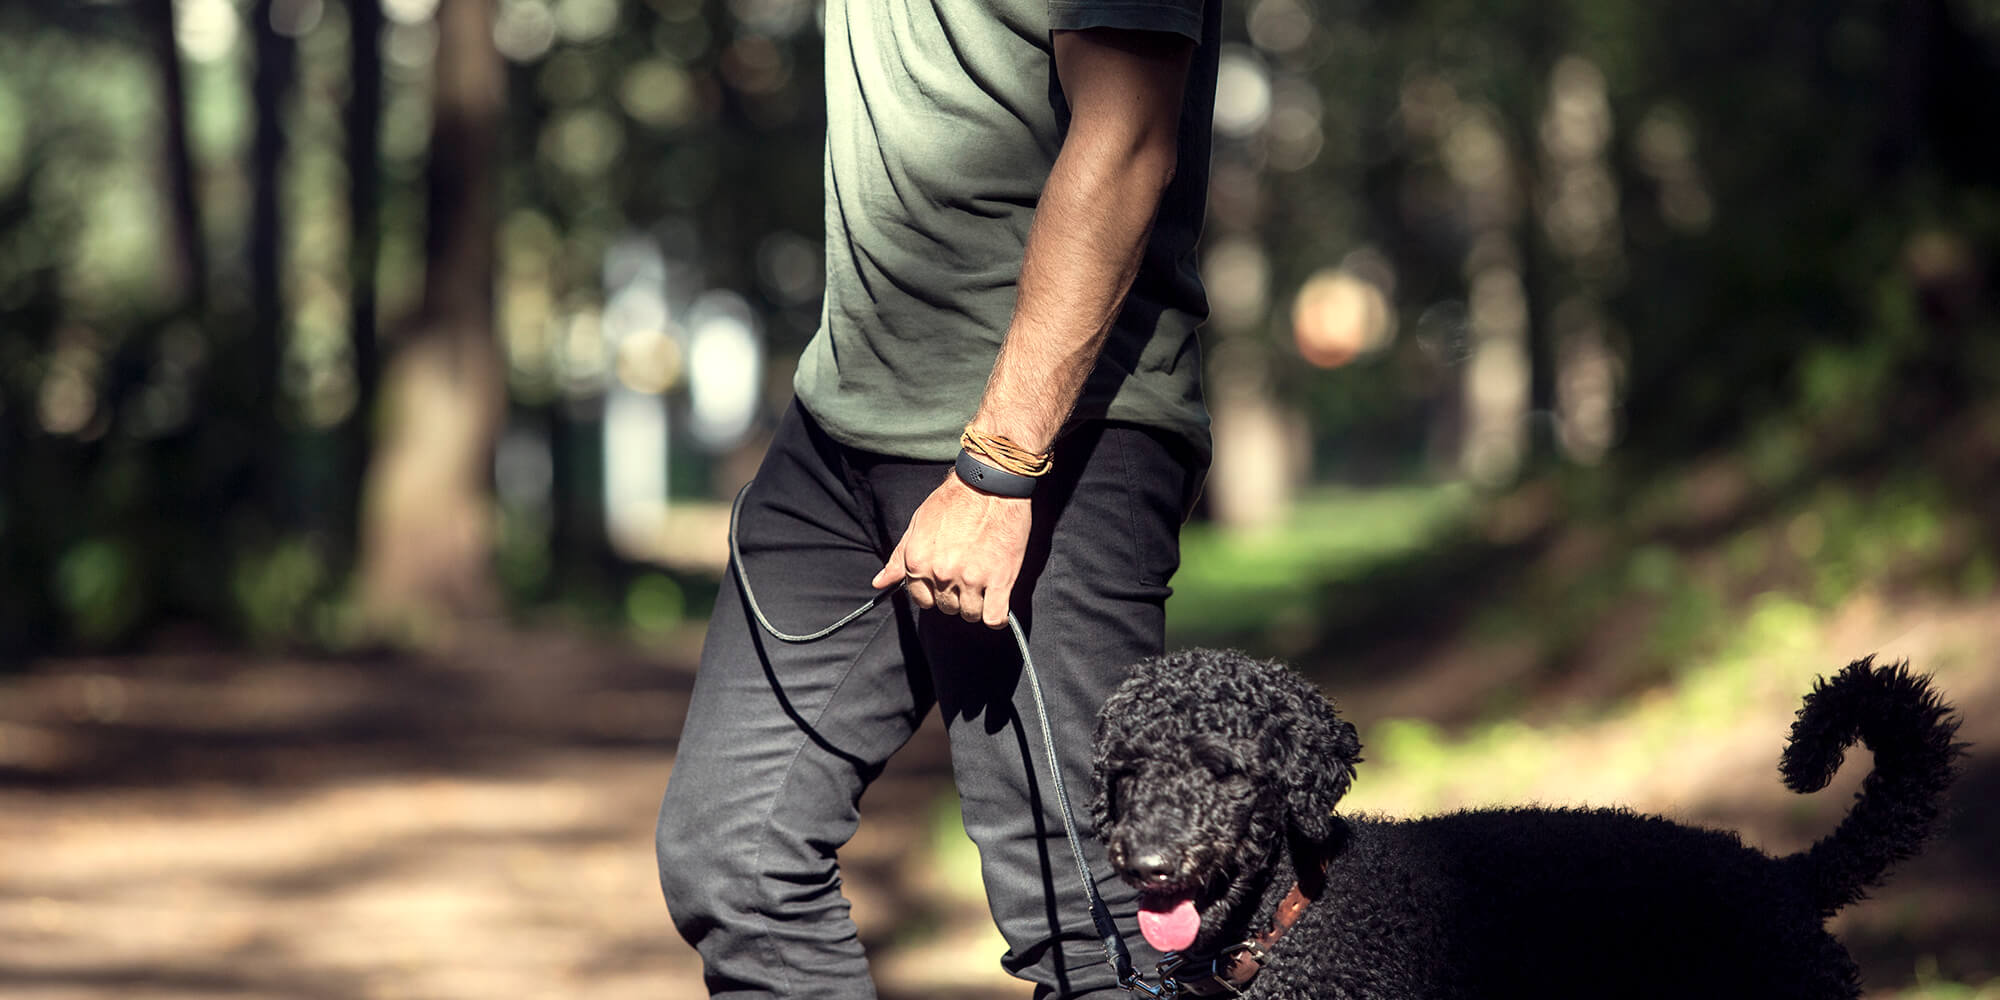 Youngster takes his dog for a walk wearing the clean-lined black AMBRIO bracelet